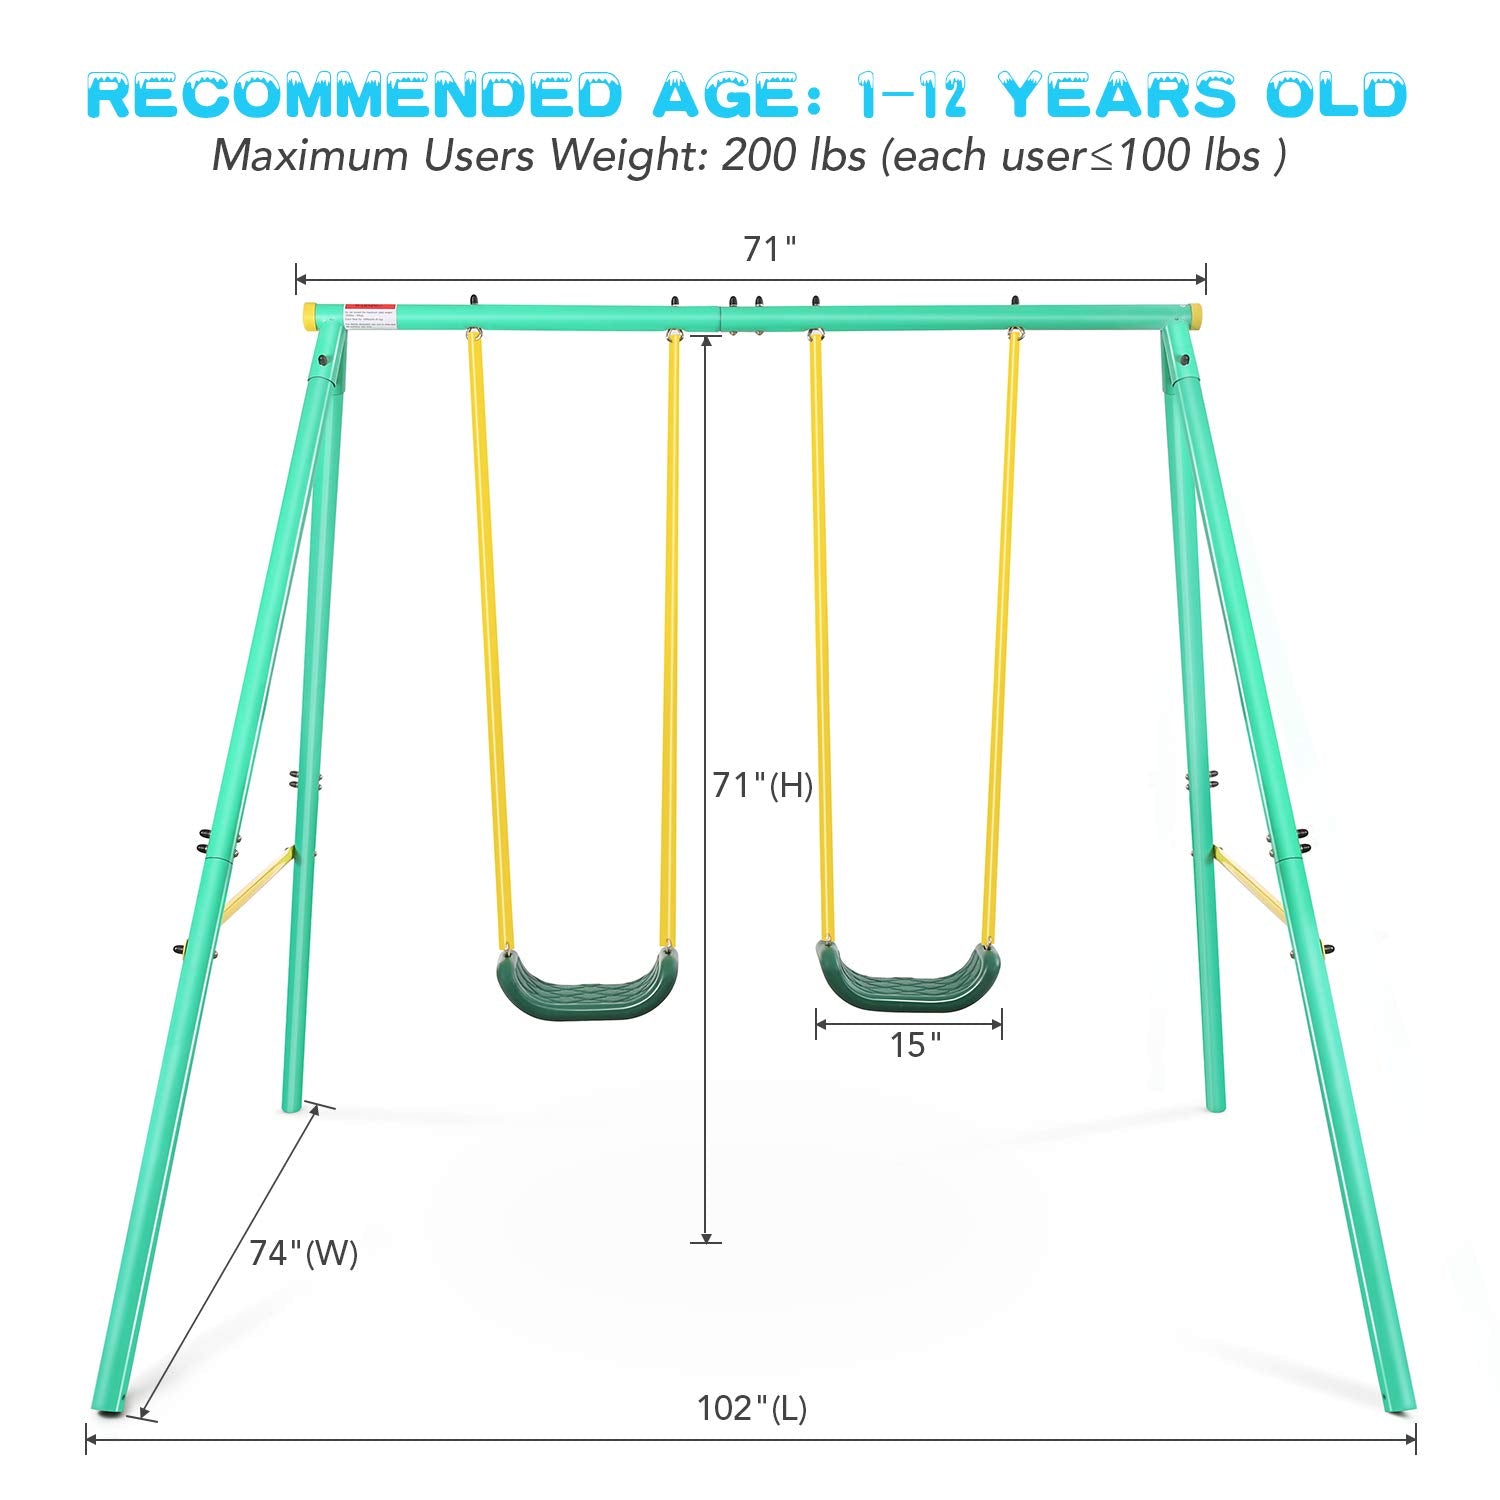 Load image into Gallery viewer, MaxKare Metal Swing Set Outdoor 2 Seats for 1-12 Year Old Kids Toddlers , Heavy Duty Swing Sets for Backyard Playground, Max Weight 200 LBS
